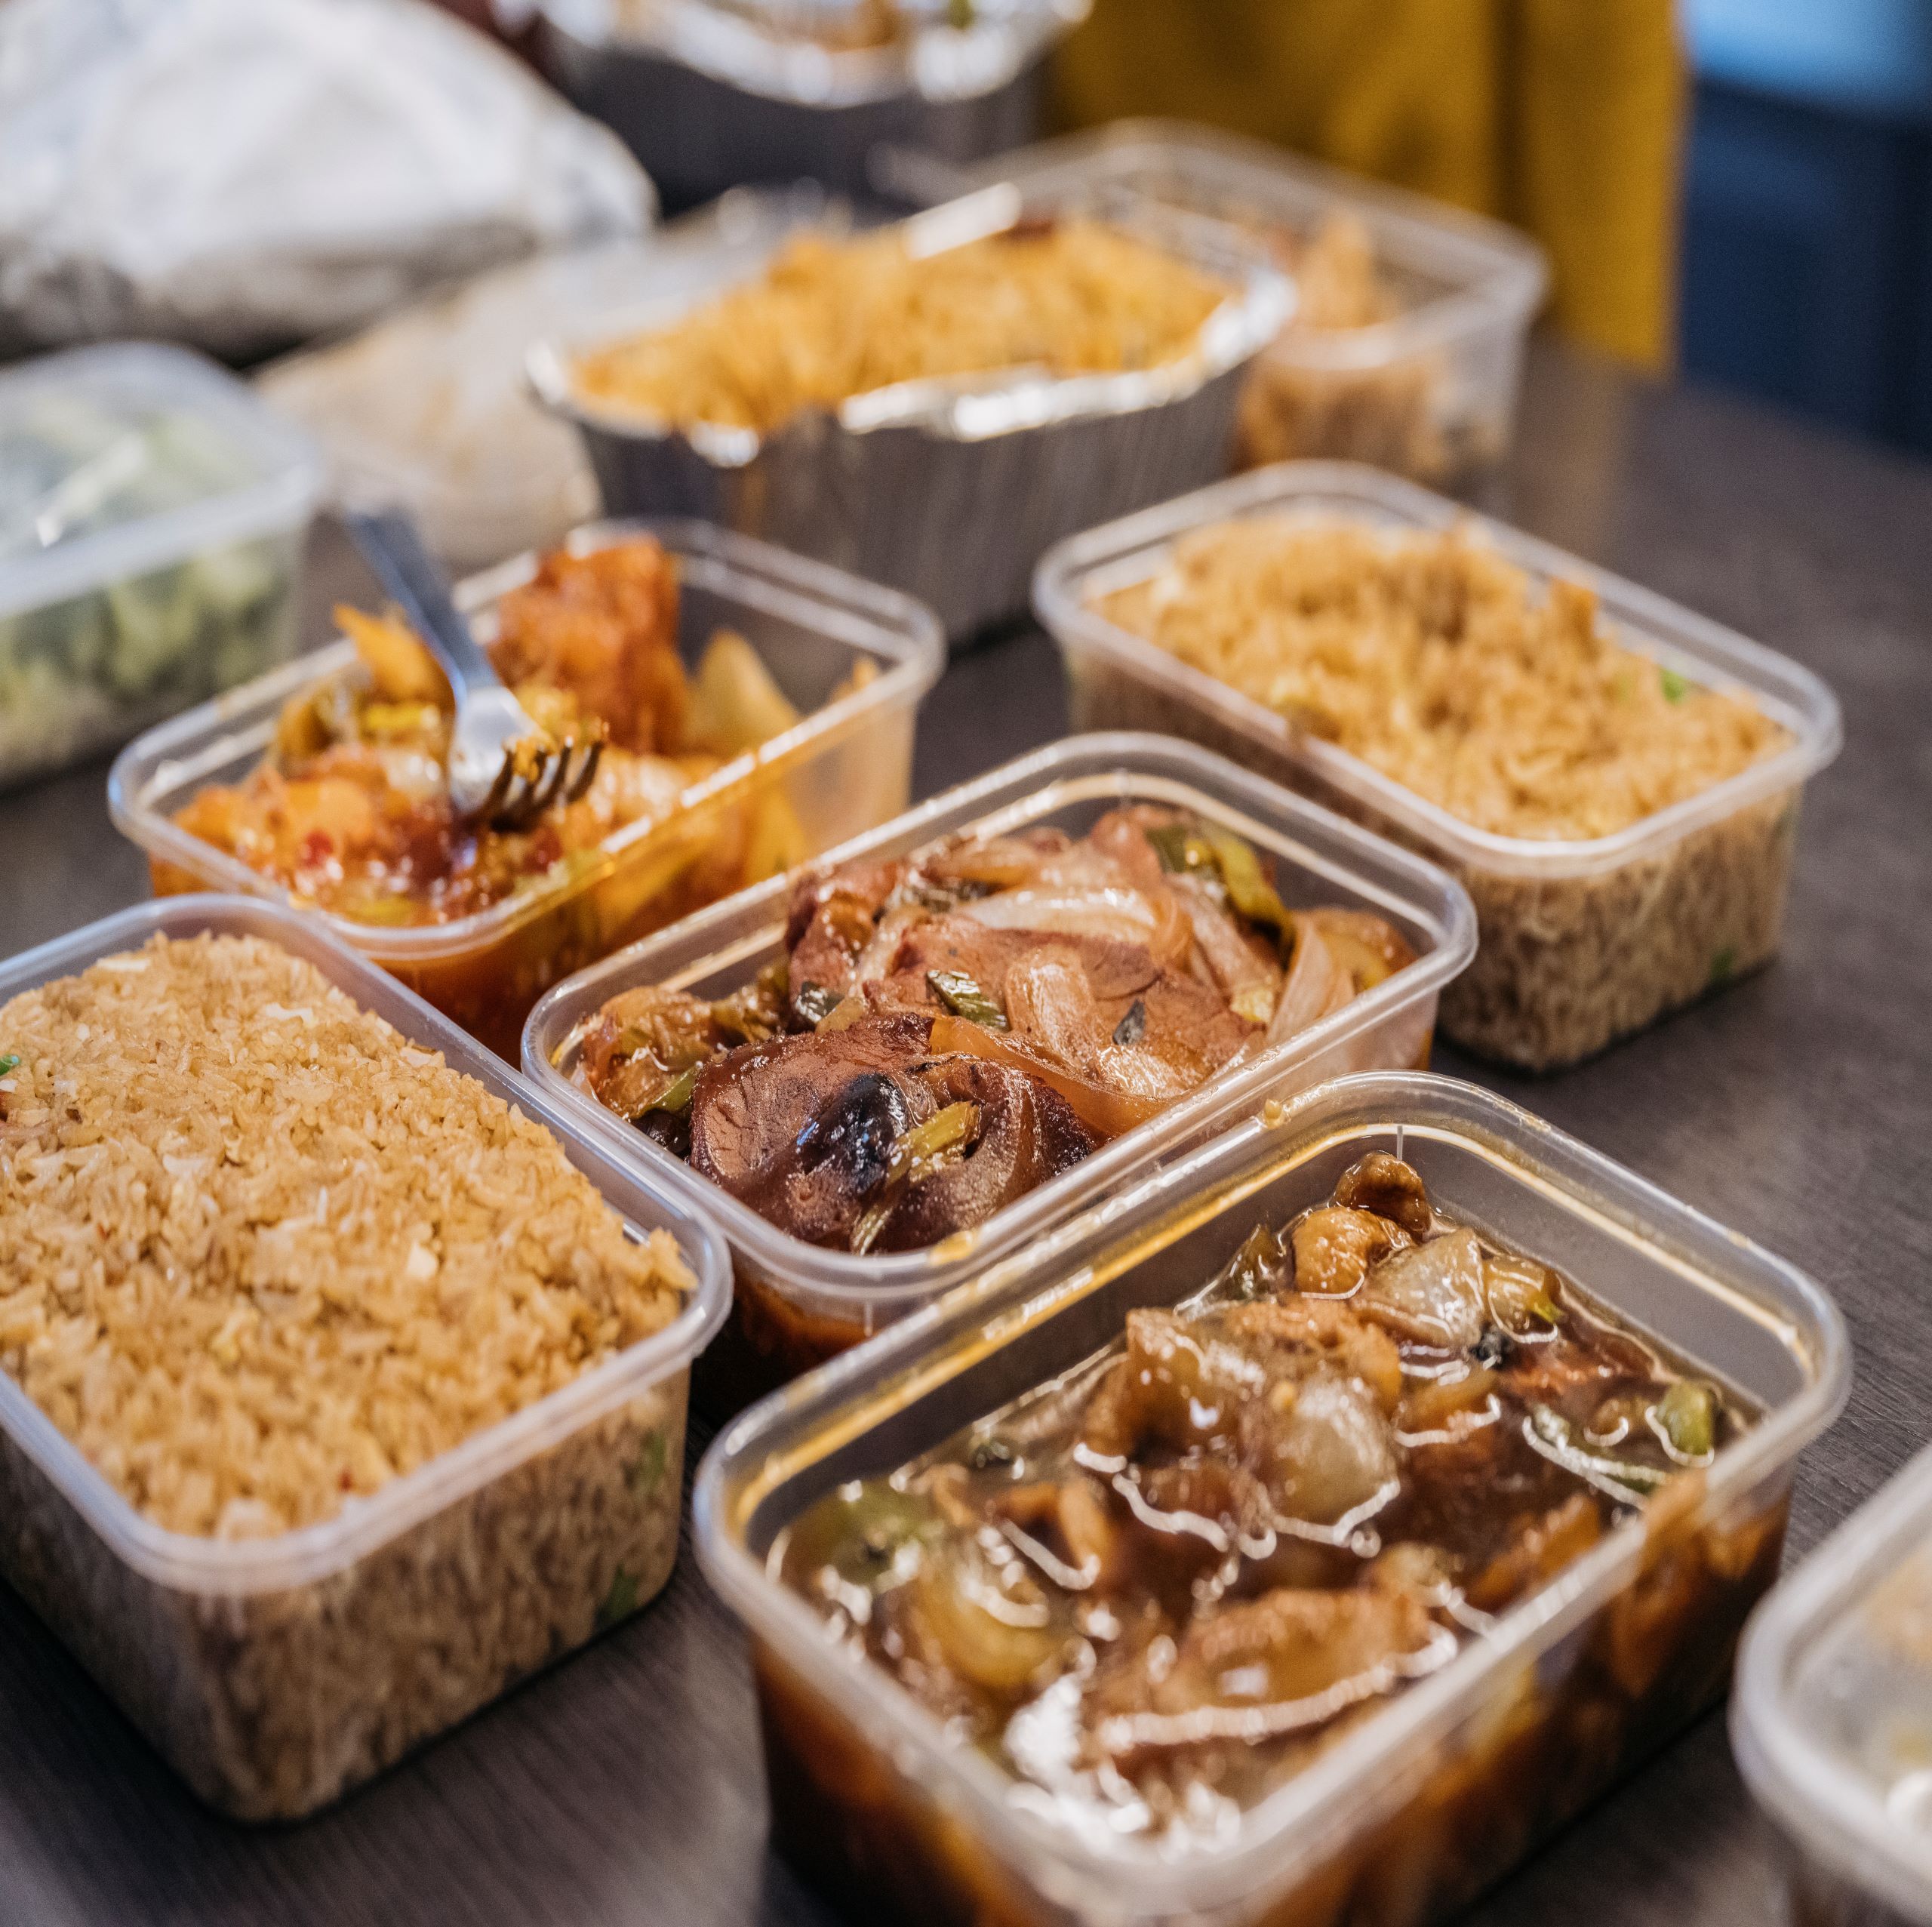 Food Handling & Catering 2 (takeaway containers)